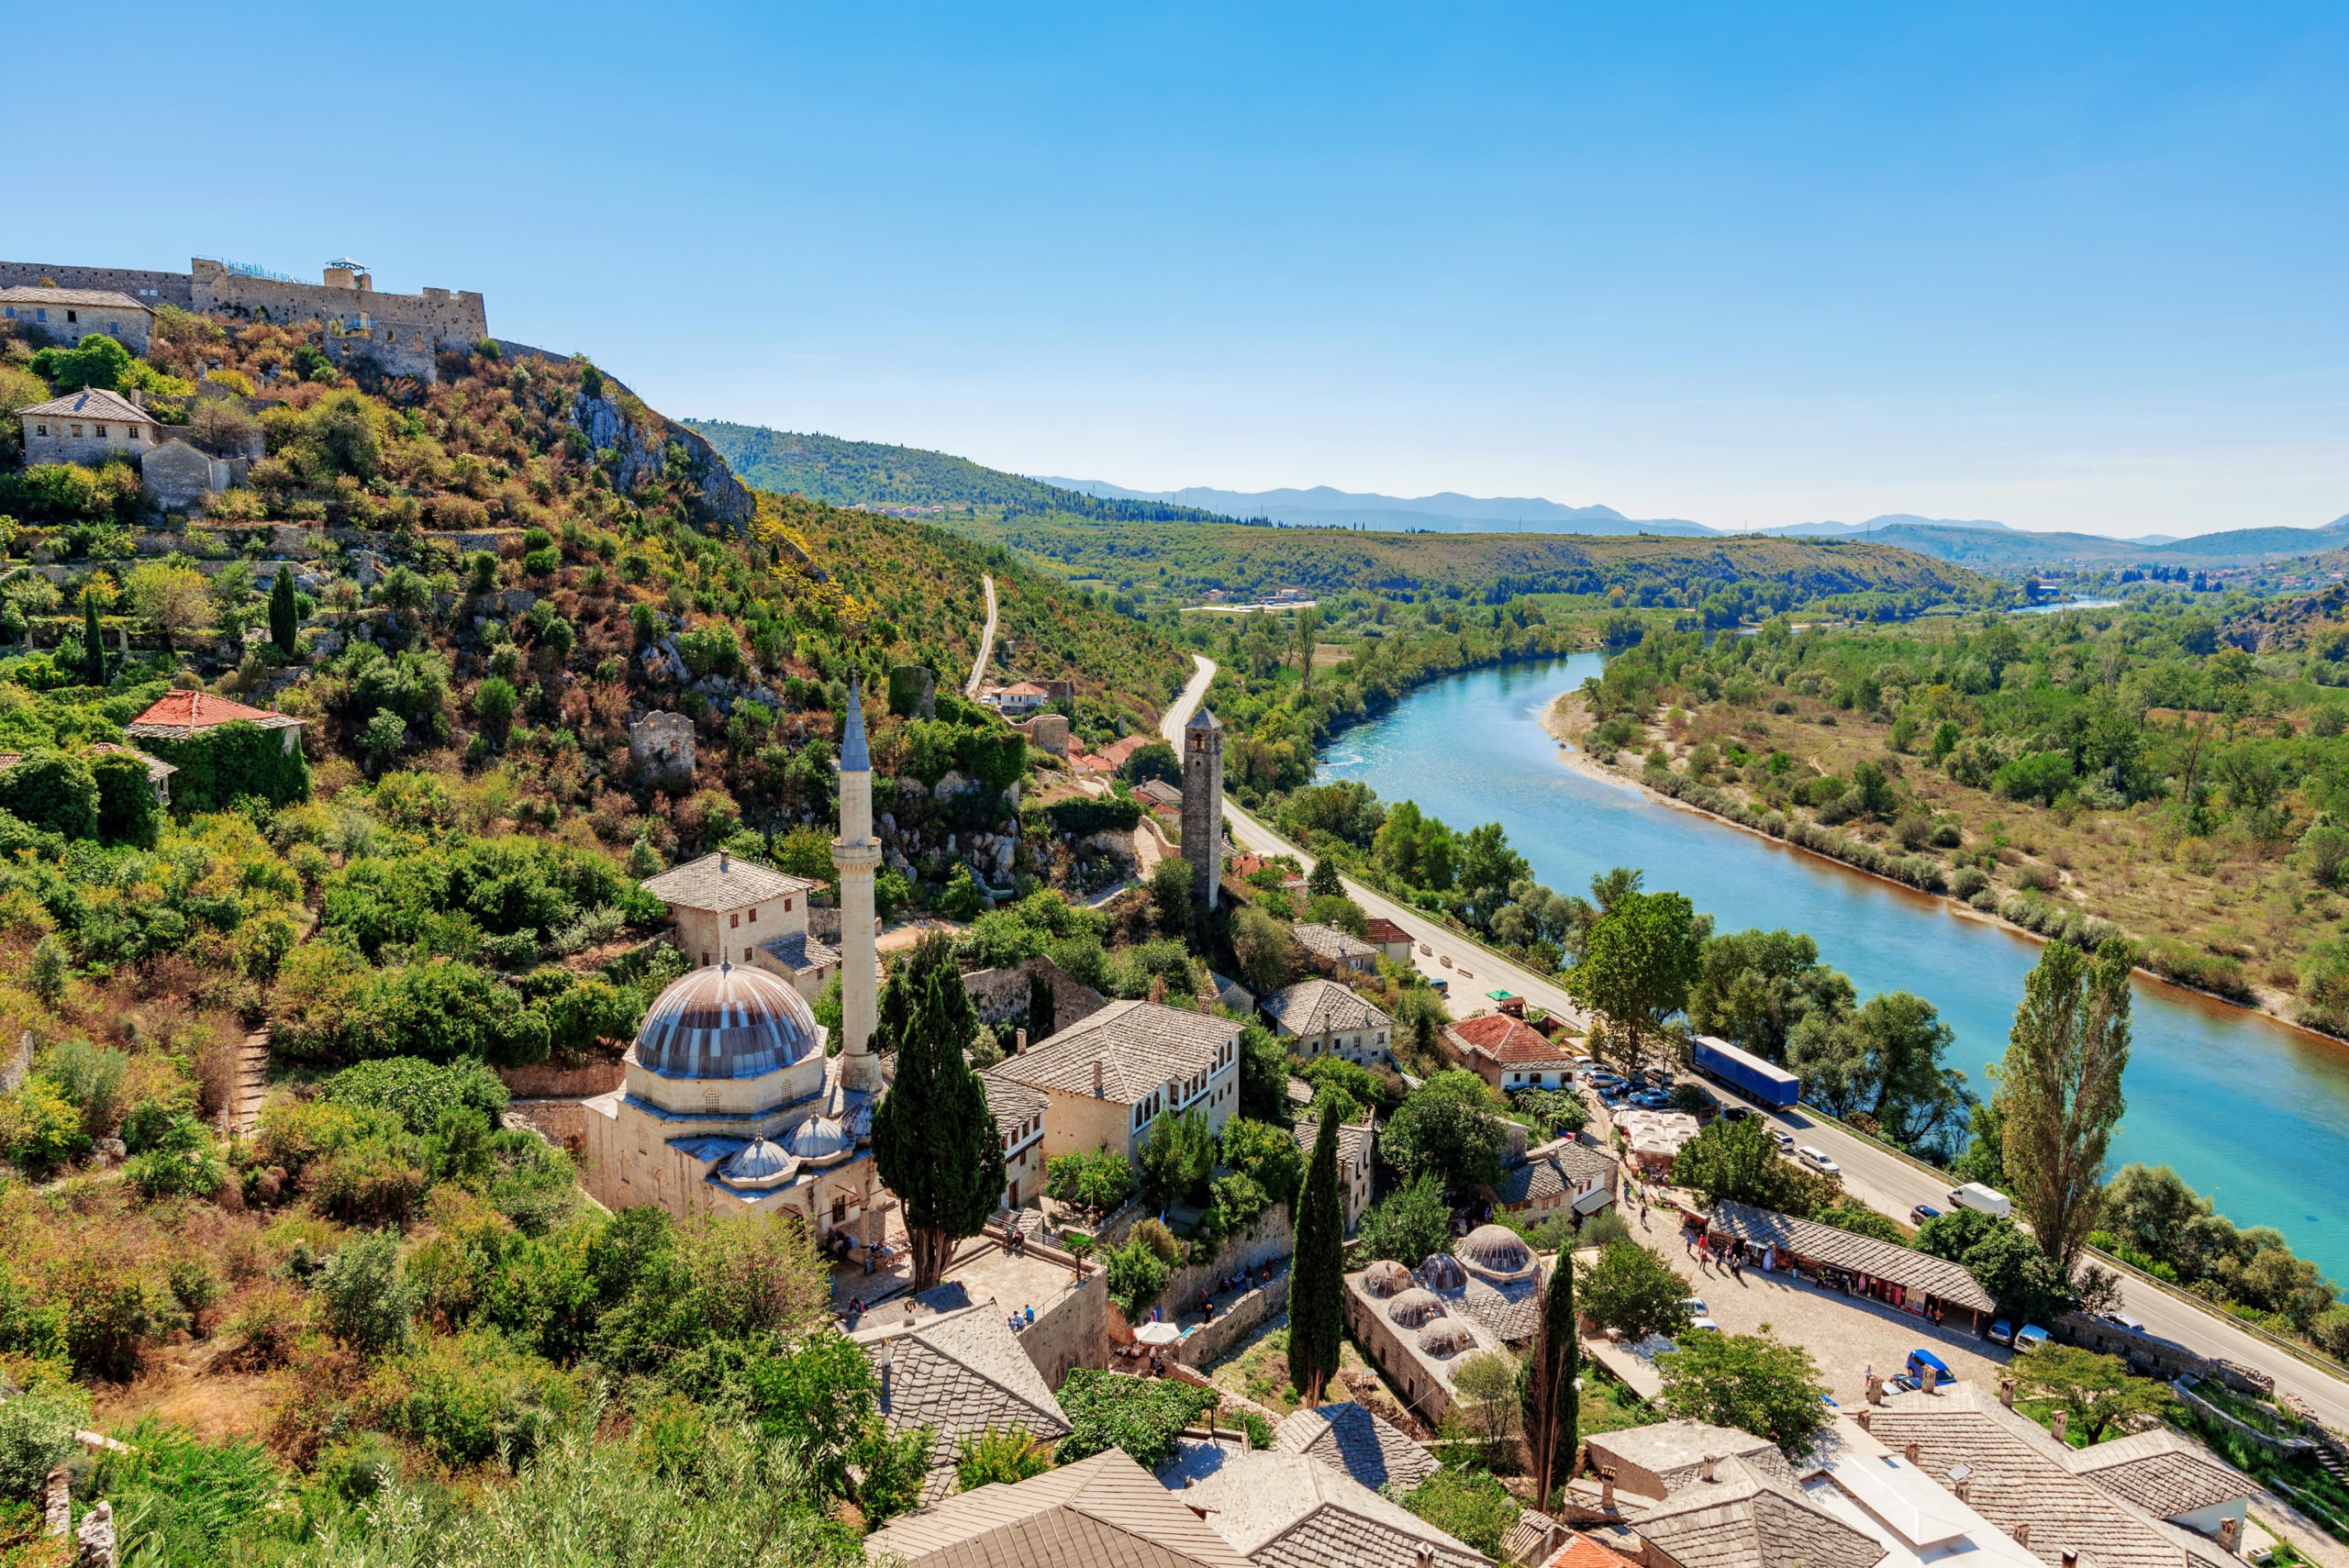 Visit The Village Of Pocitelj On The Mostar And Kravice Tour From Dubrovnik